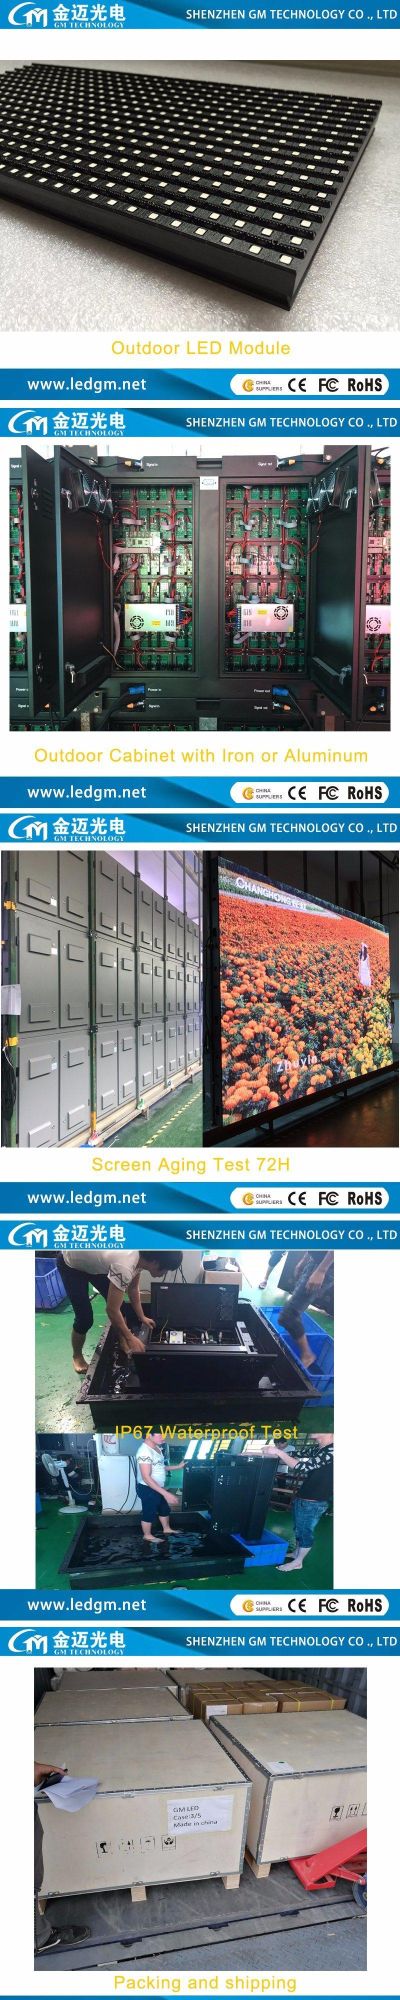 Outdoor Digital Comercial Advertising P8mm LED Video Wall